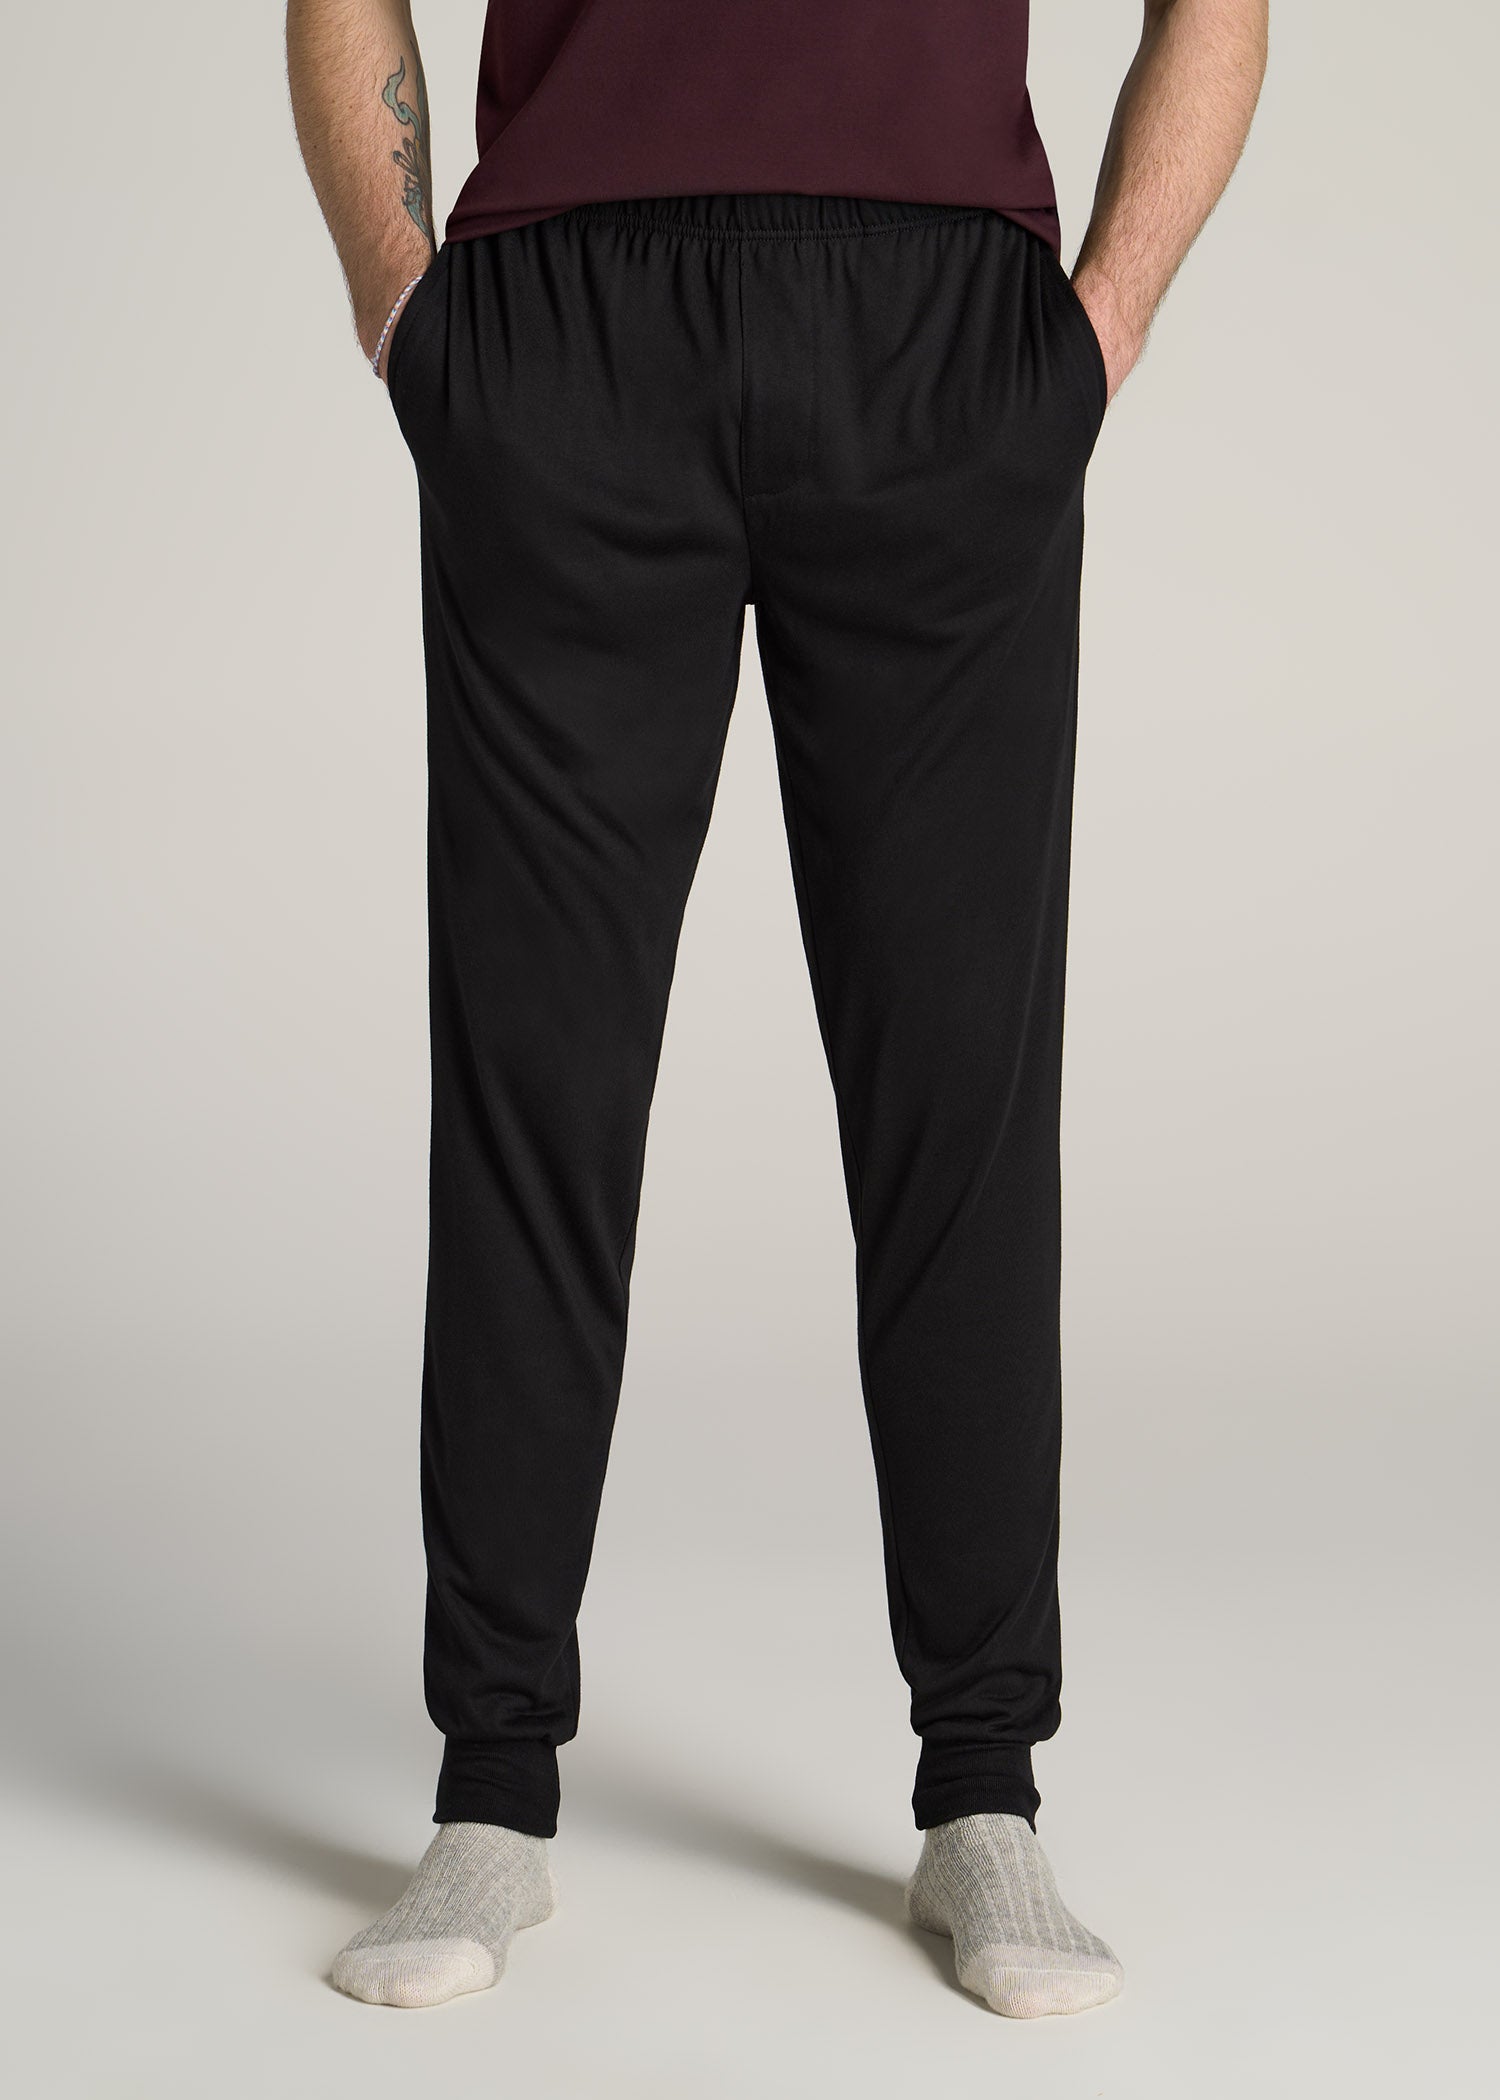 Tall Men's Lounge Pant Joggers in Black